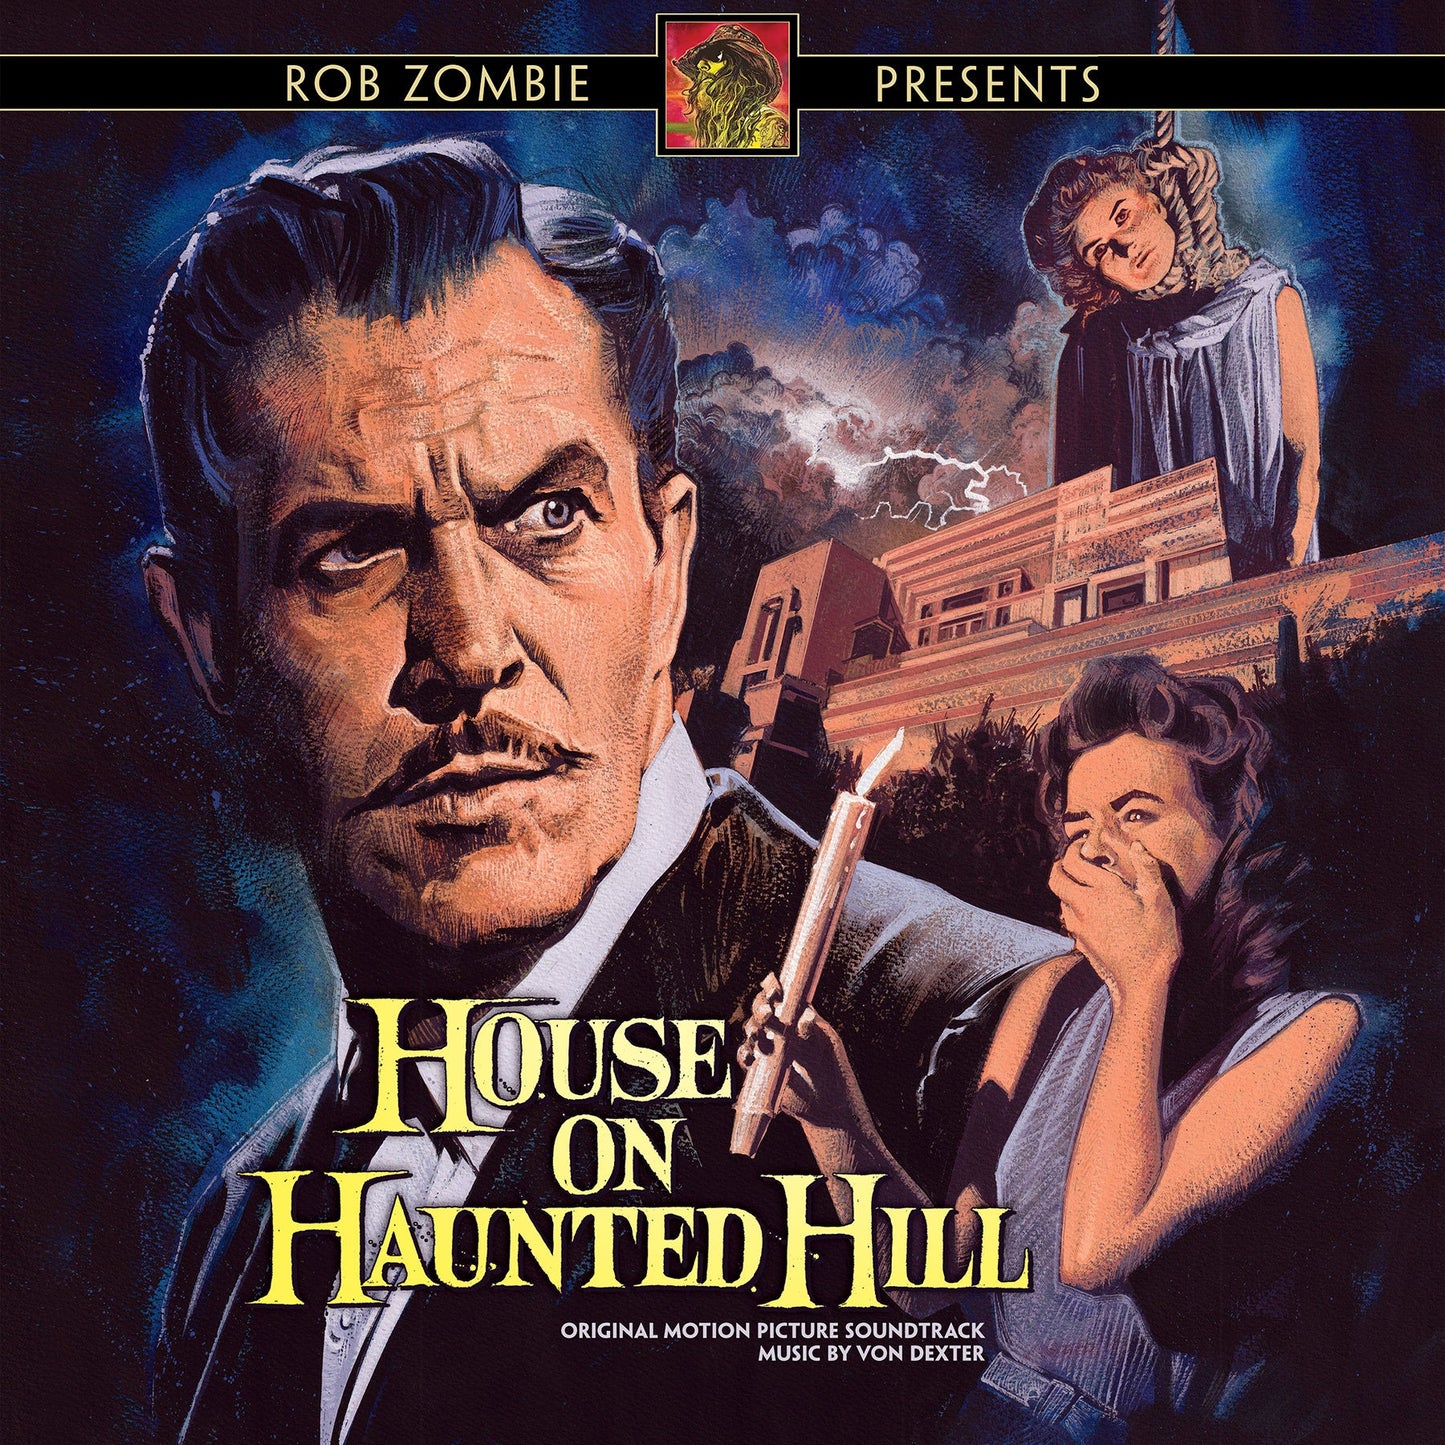 PRE-ORDER Rob Zombie Presents House On Haunted Hill